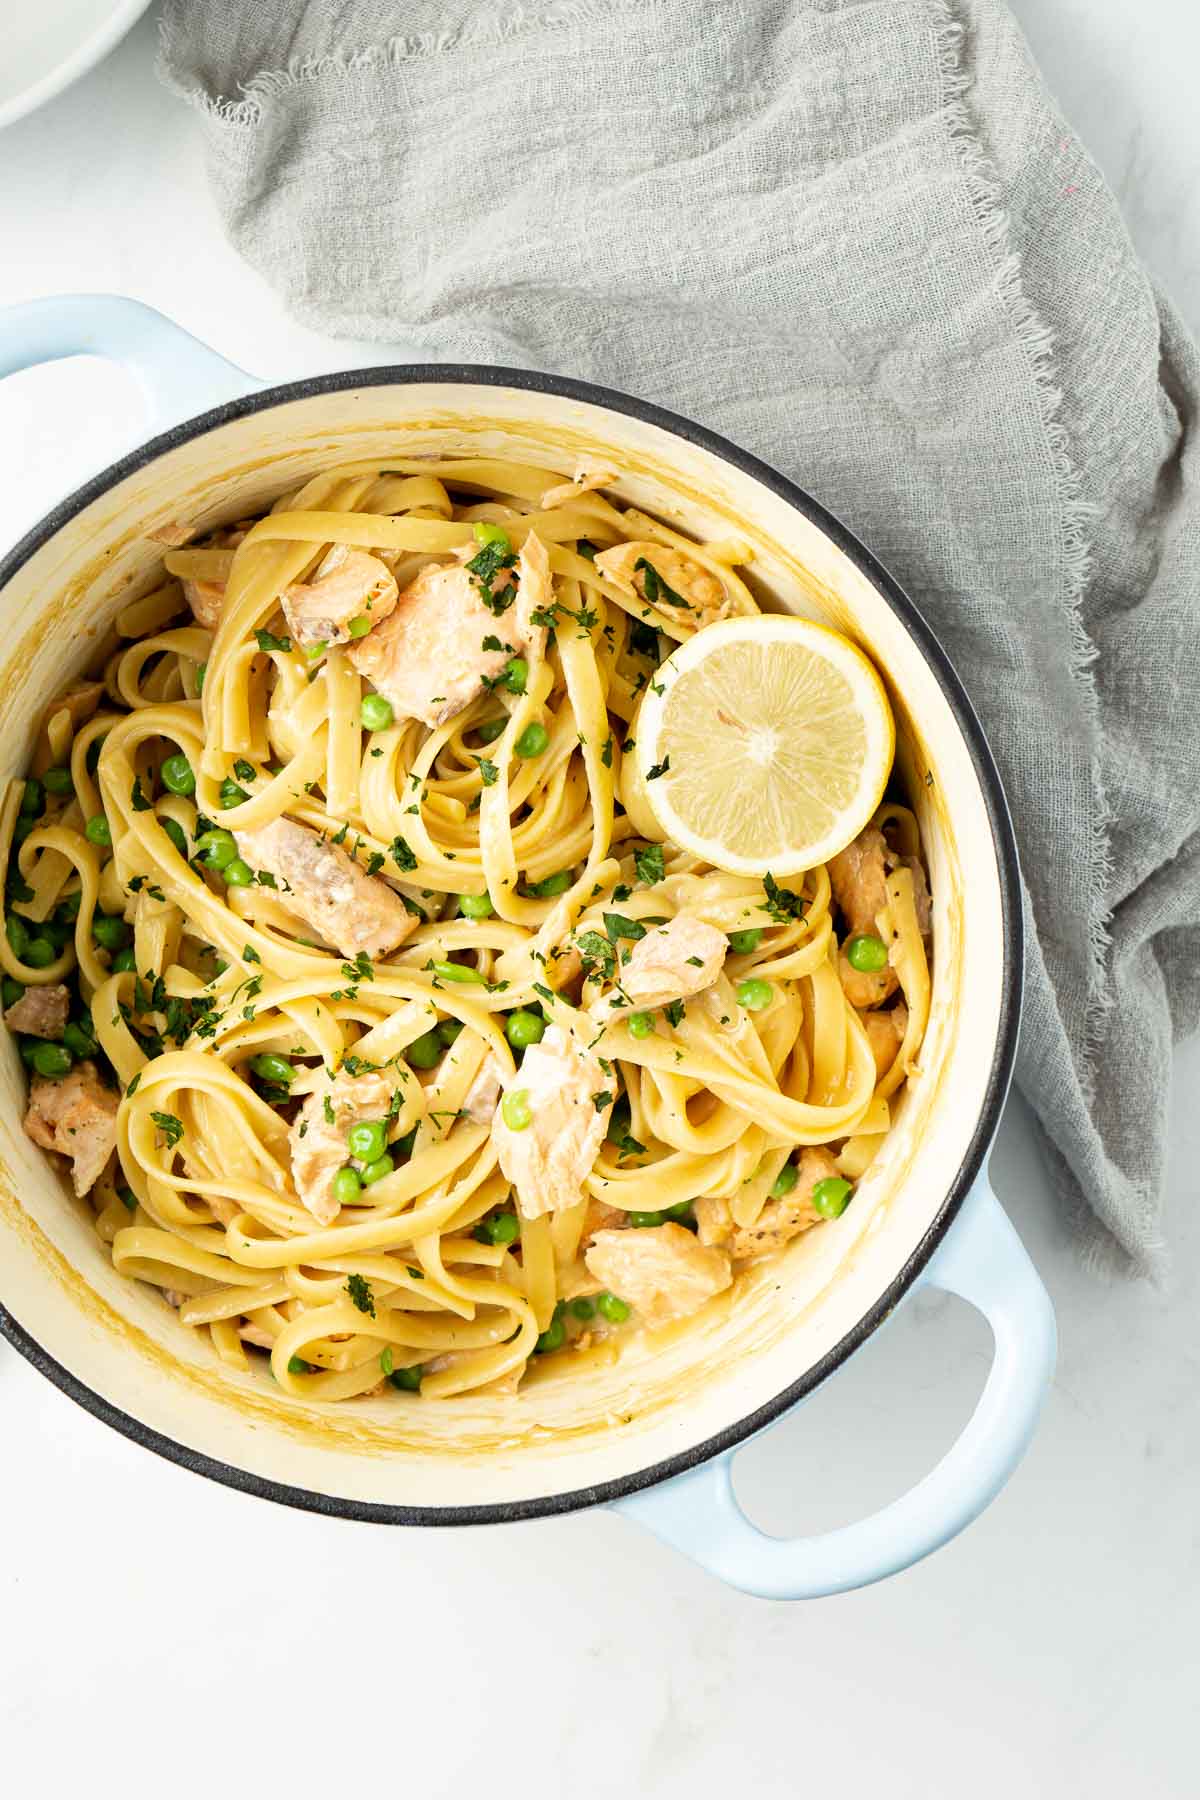 Creamy salmon pasta in the pot with lemon and parsley to garnish.